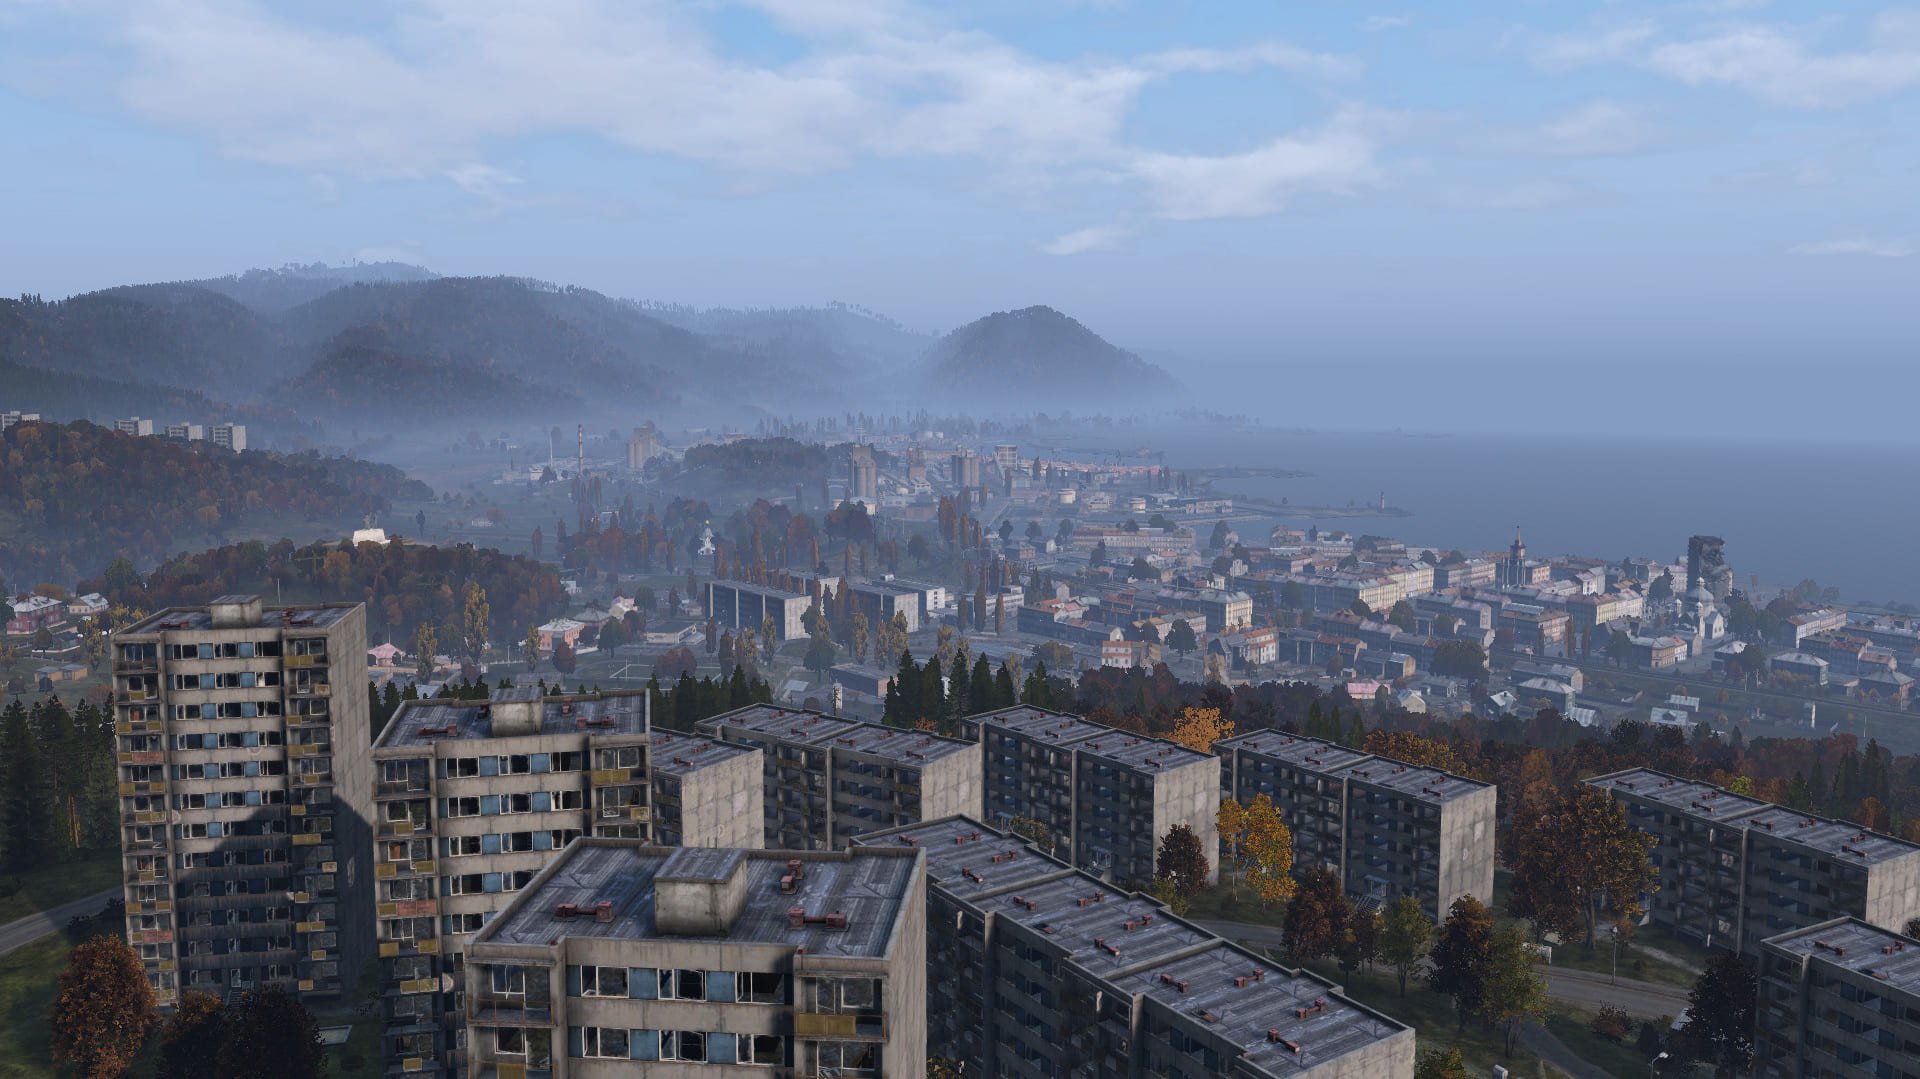 DayZ is coming to PlayStation 4.